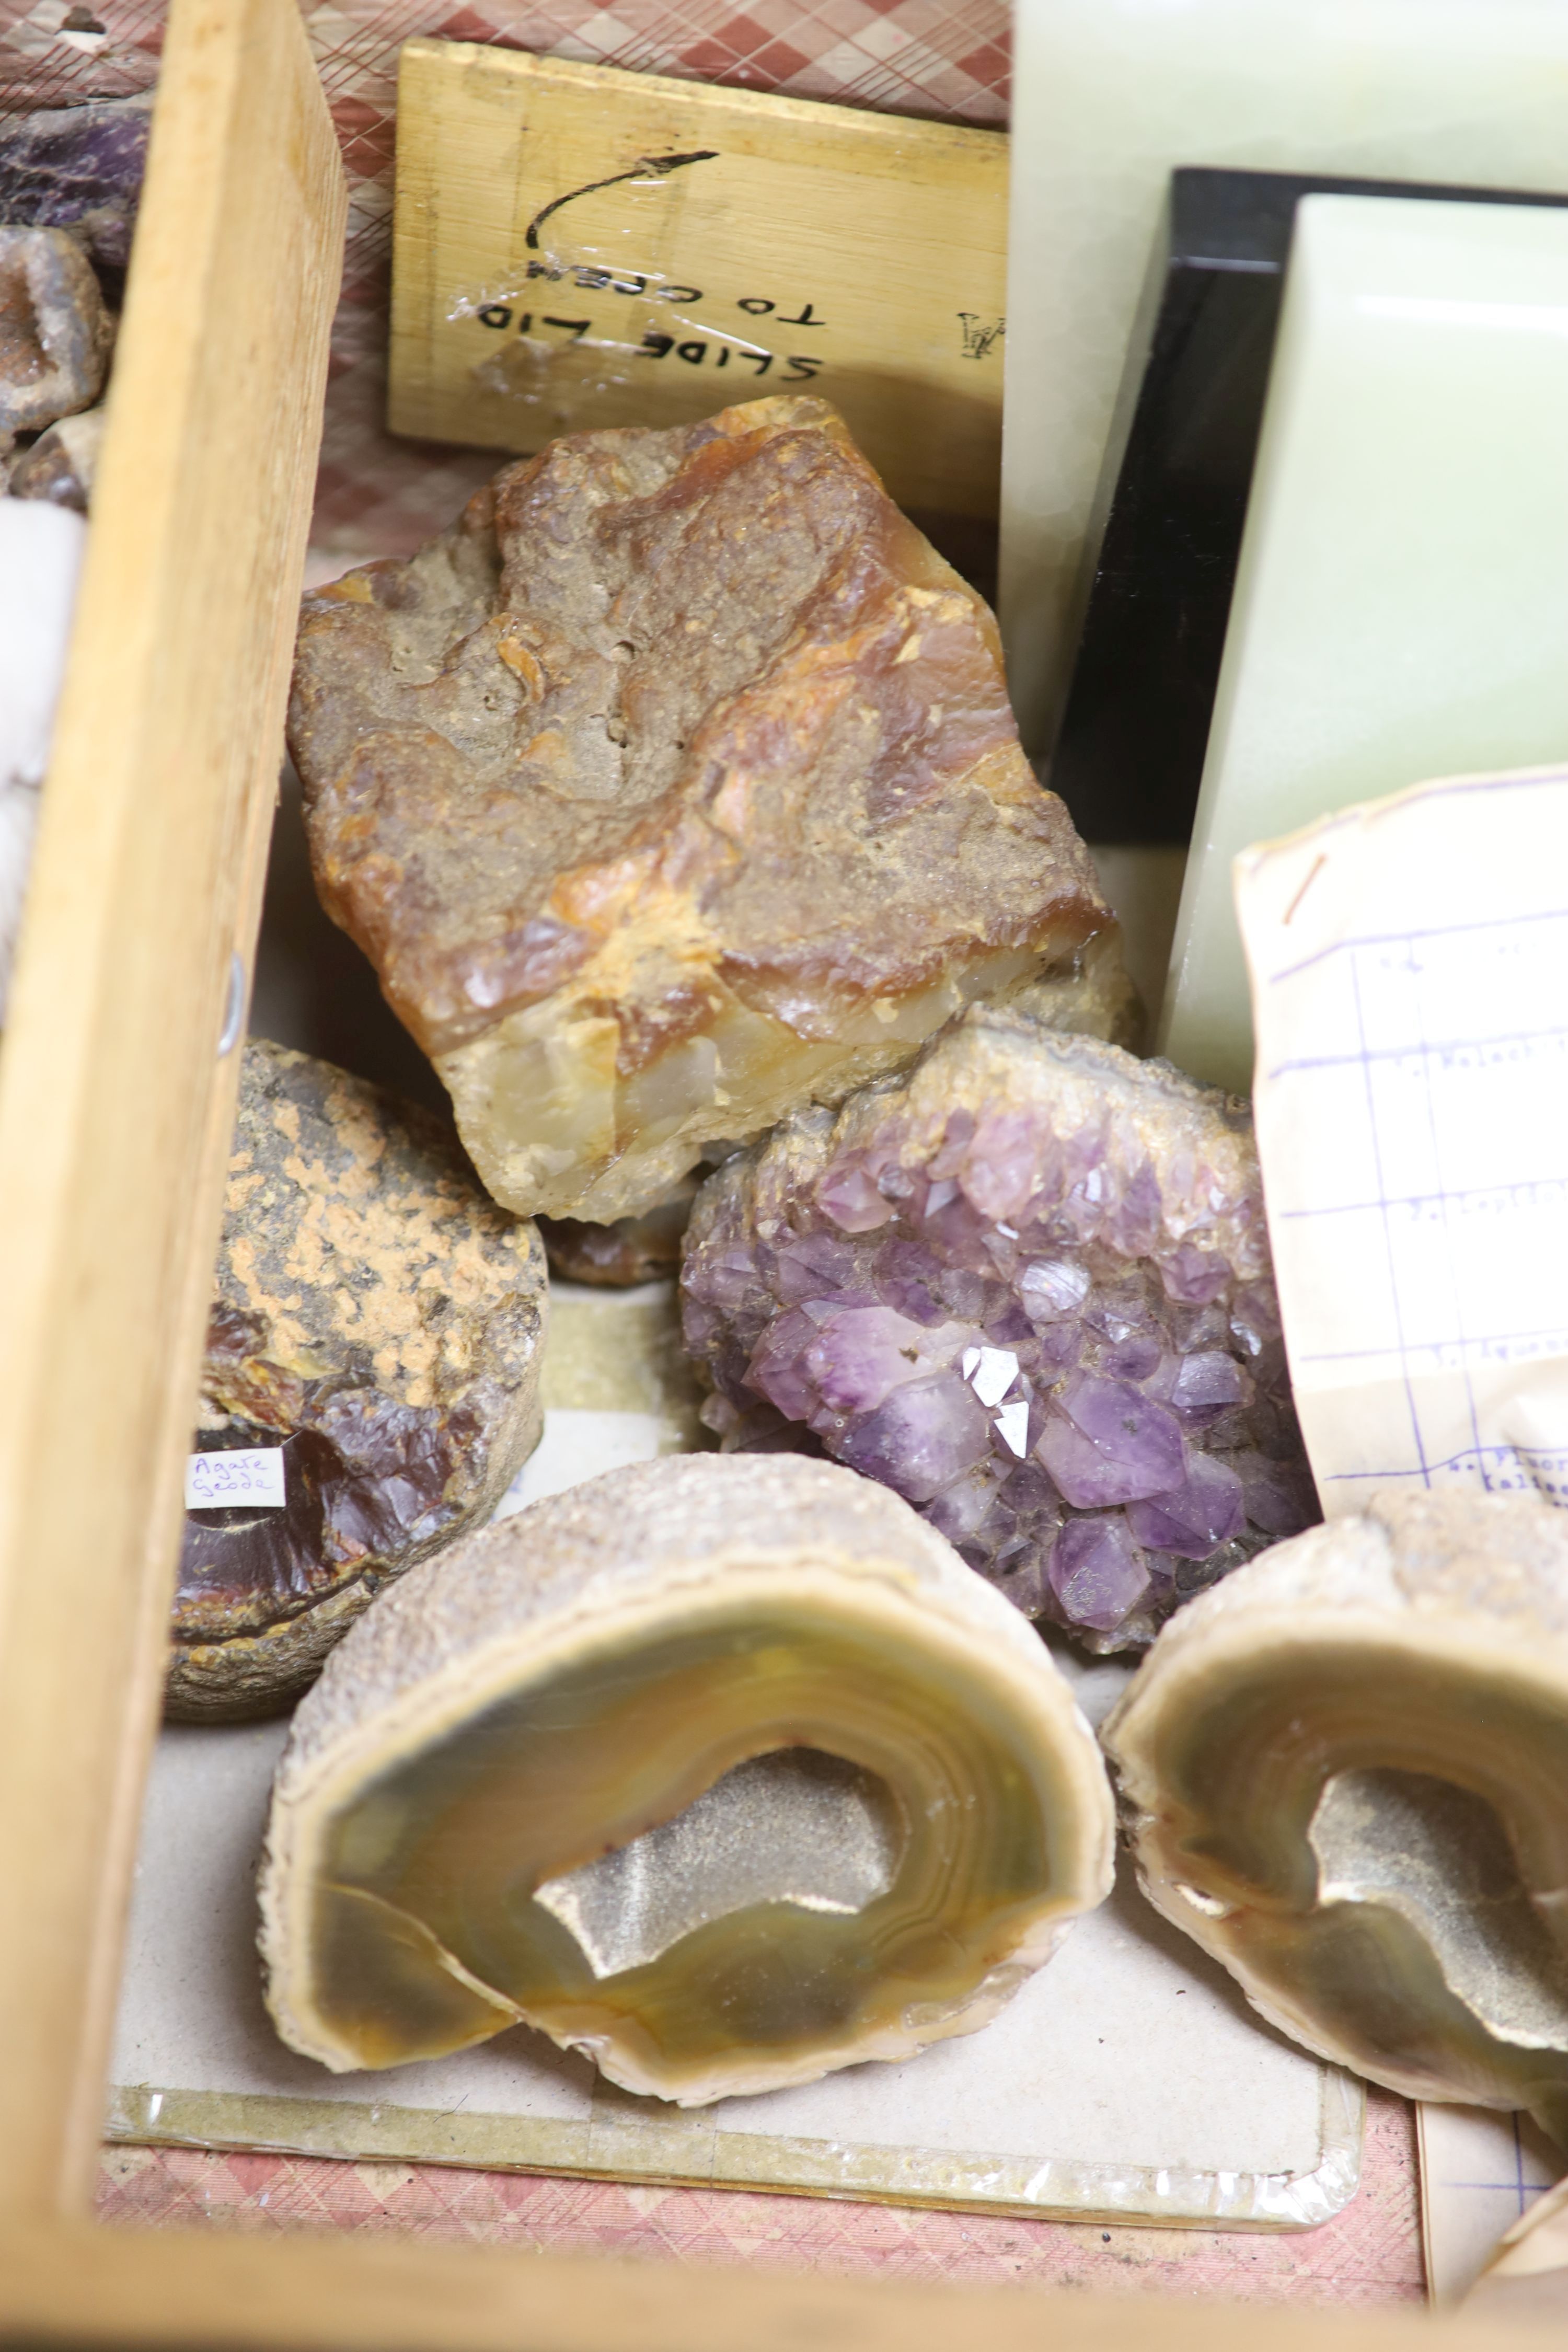 A collection of assorted minerals, geodes etc